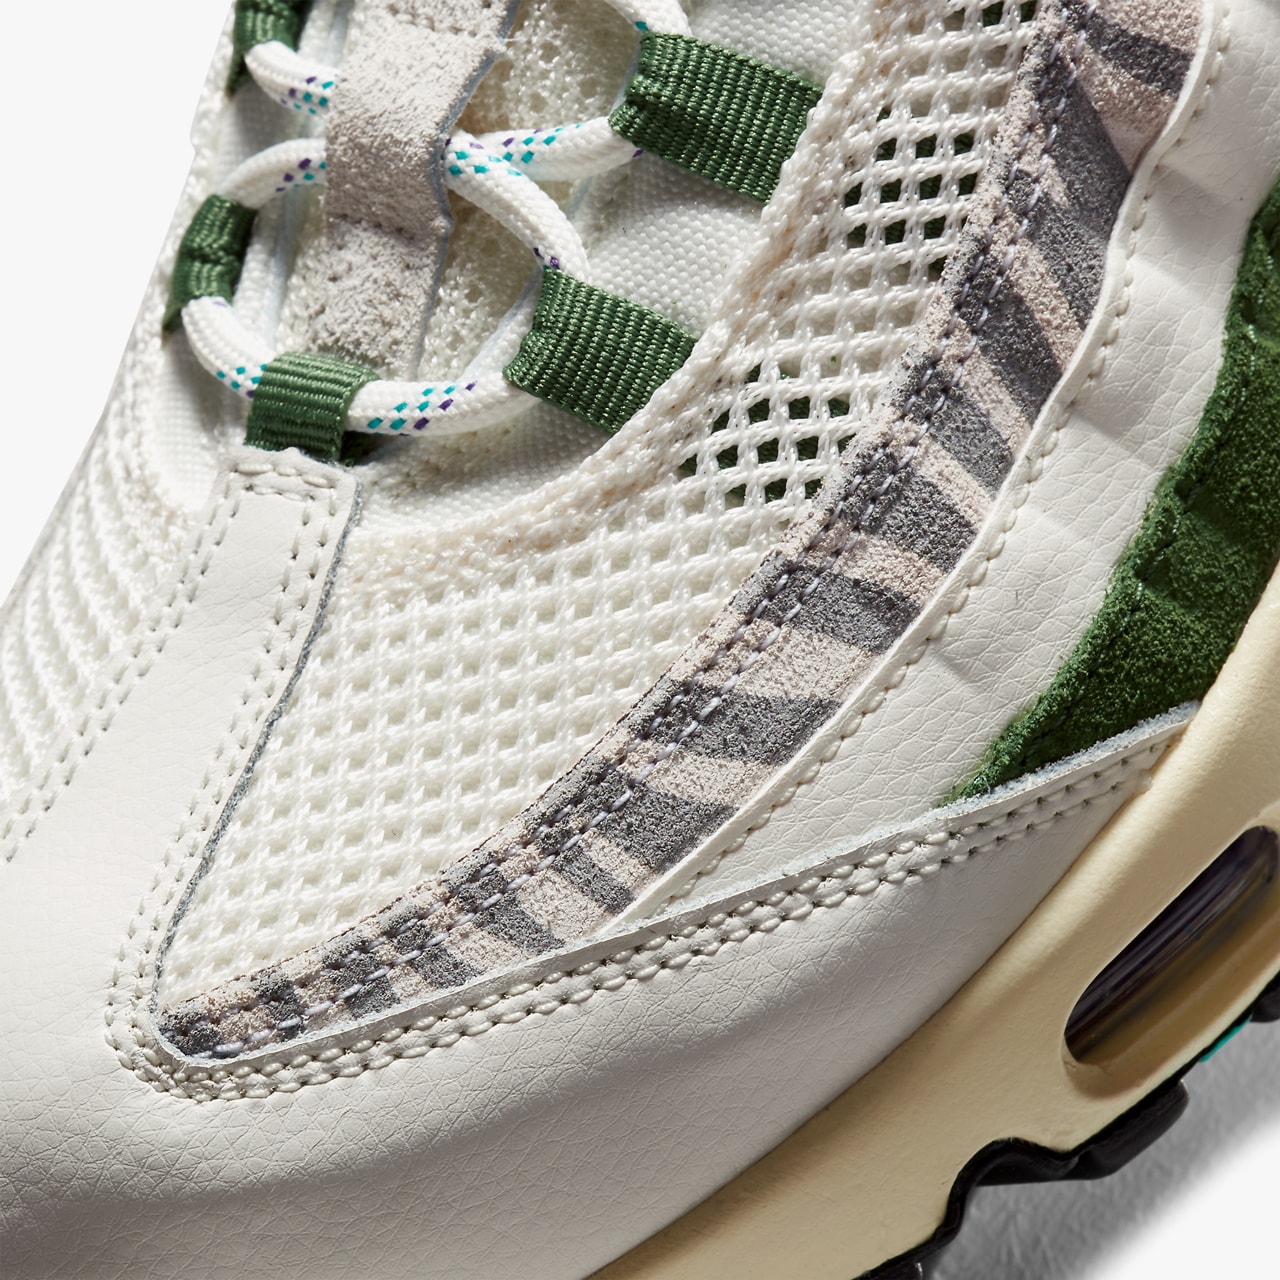 nike sportswear air max 95 era sail new forest green CZ9723 100 official release date info photos price store list